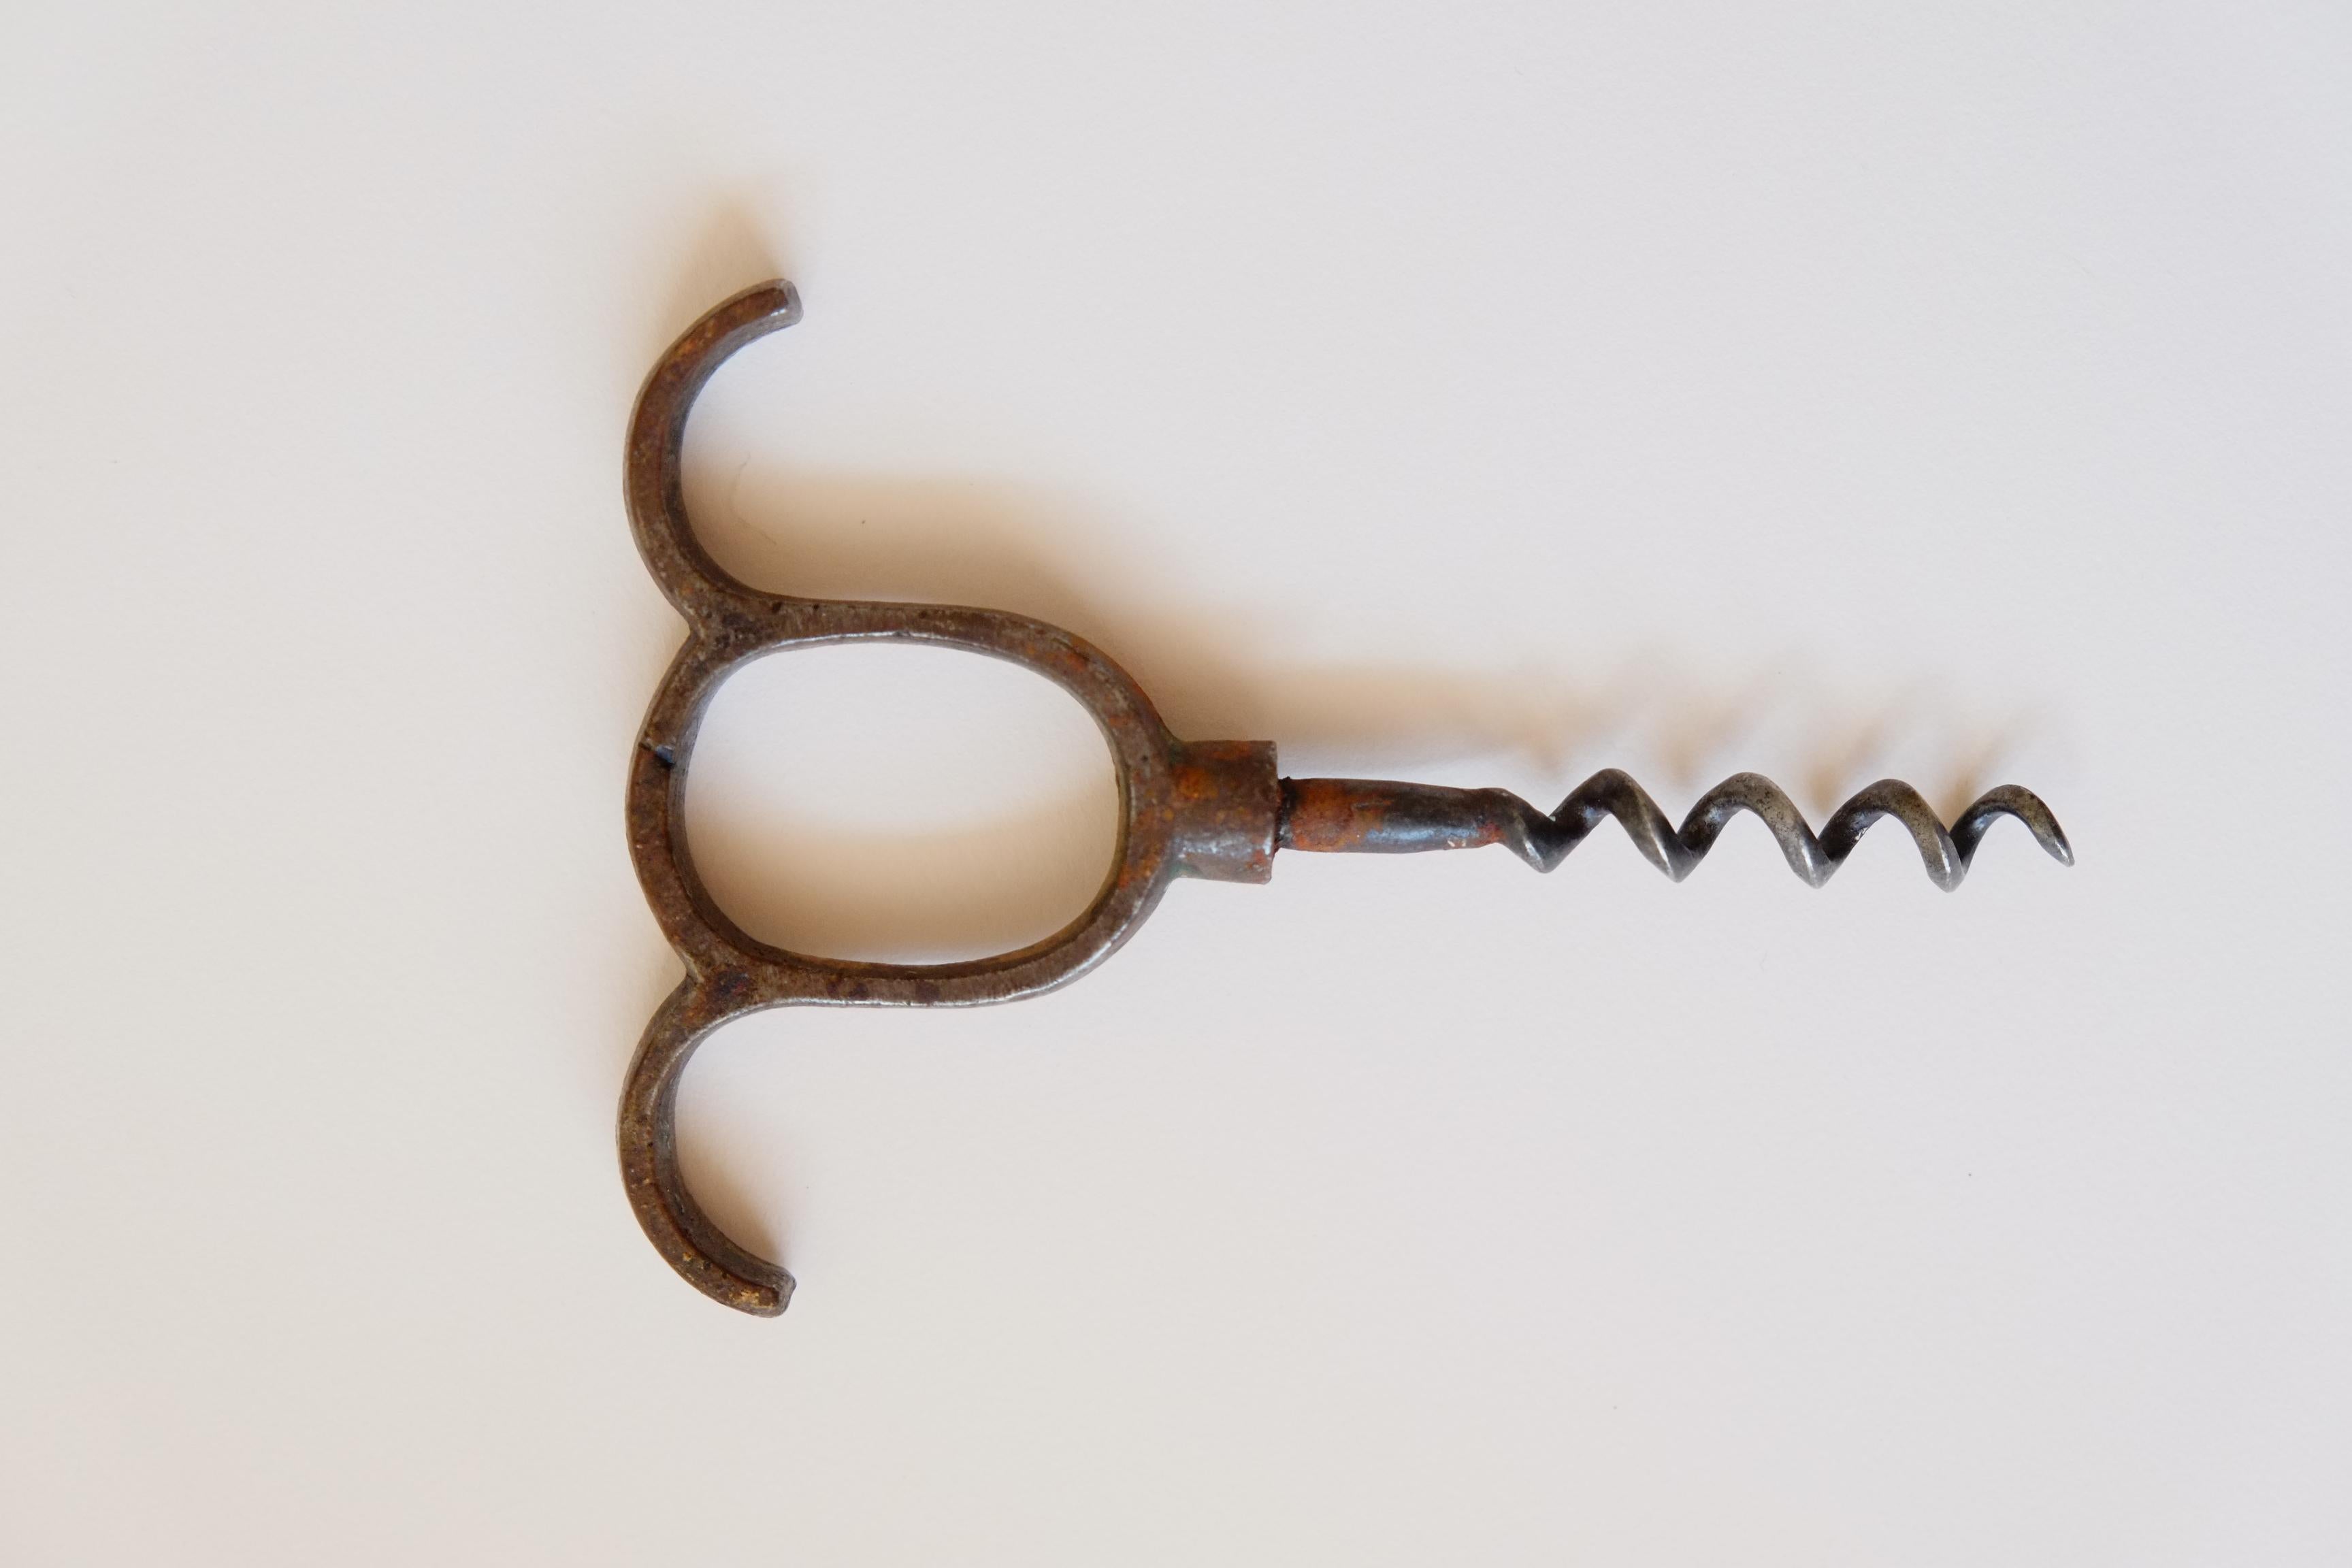 A beautiful cast iron antique corkscrew. From the late 19th or early 20th century - the simplest finger pull design makes for a timeless piece. The perfect addition to any bar. This corkscrew  would have been originally gilt, as there is some